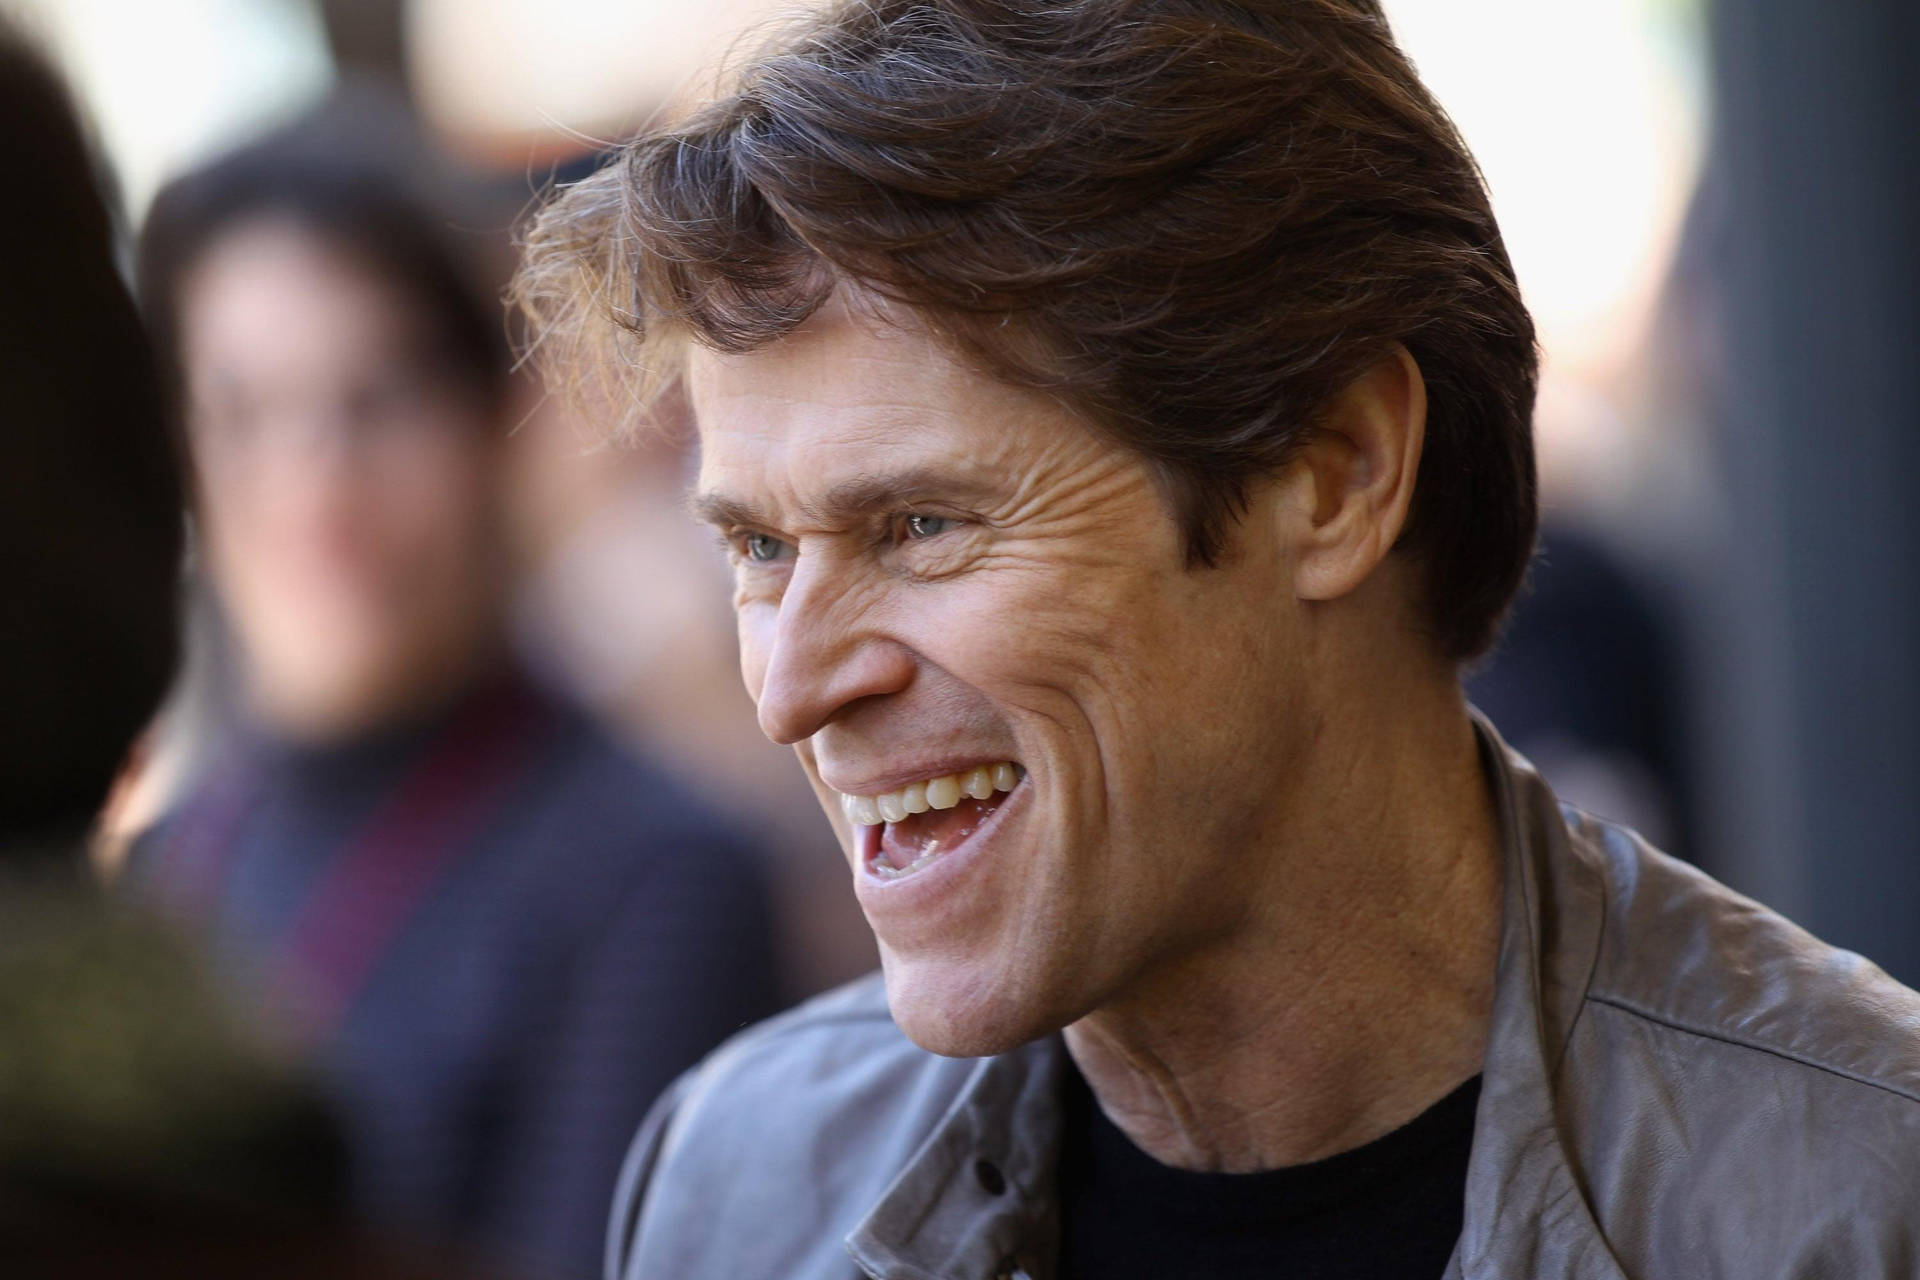 Award-winning Actor Willem Dafoe In A Captivating Side Profile View. Background